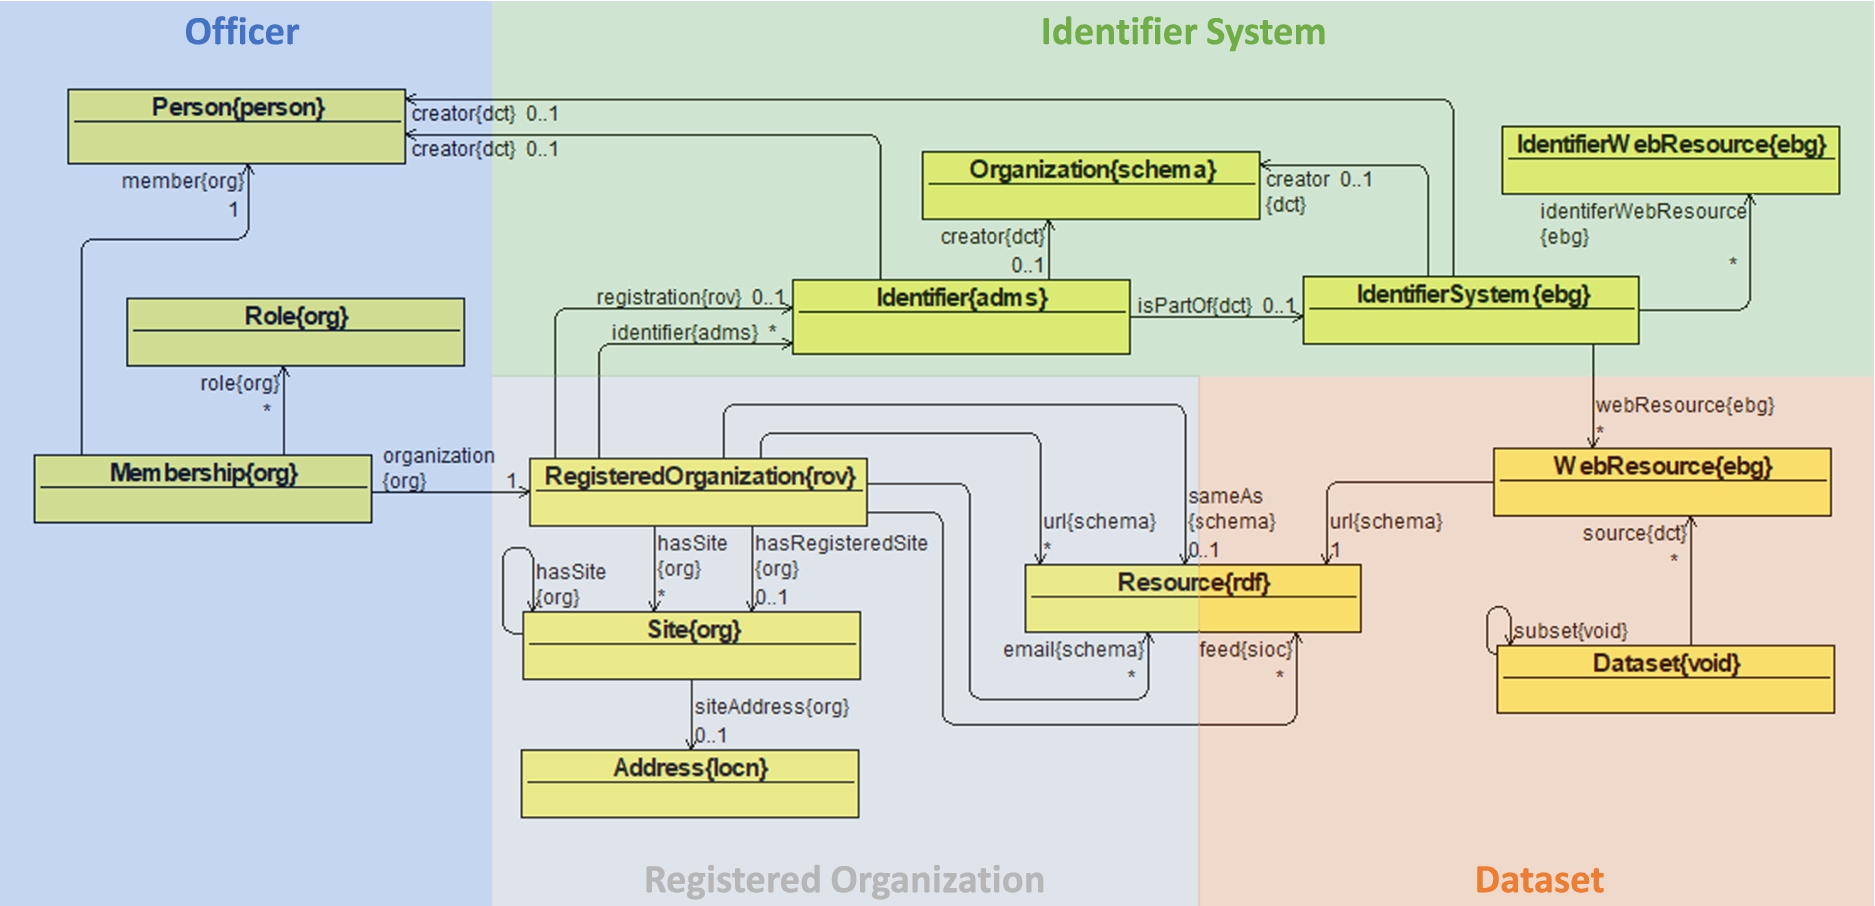 euBusinessGraph ontology overview: main classes and their relationships.